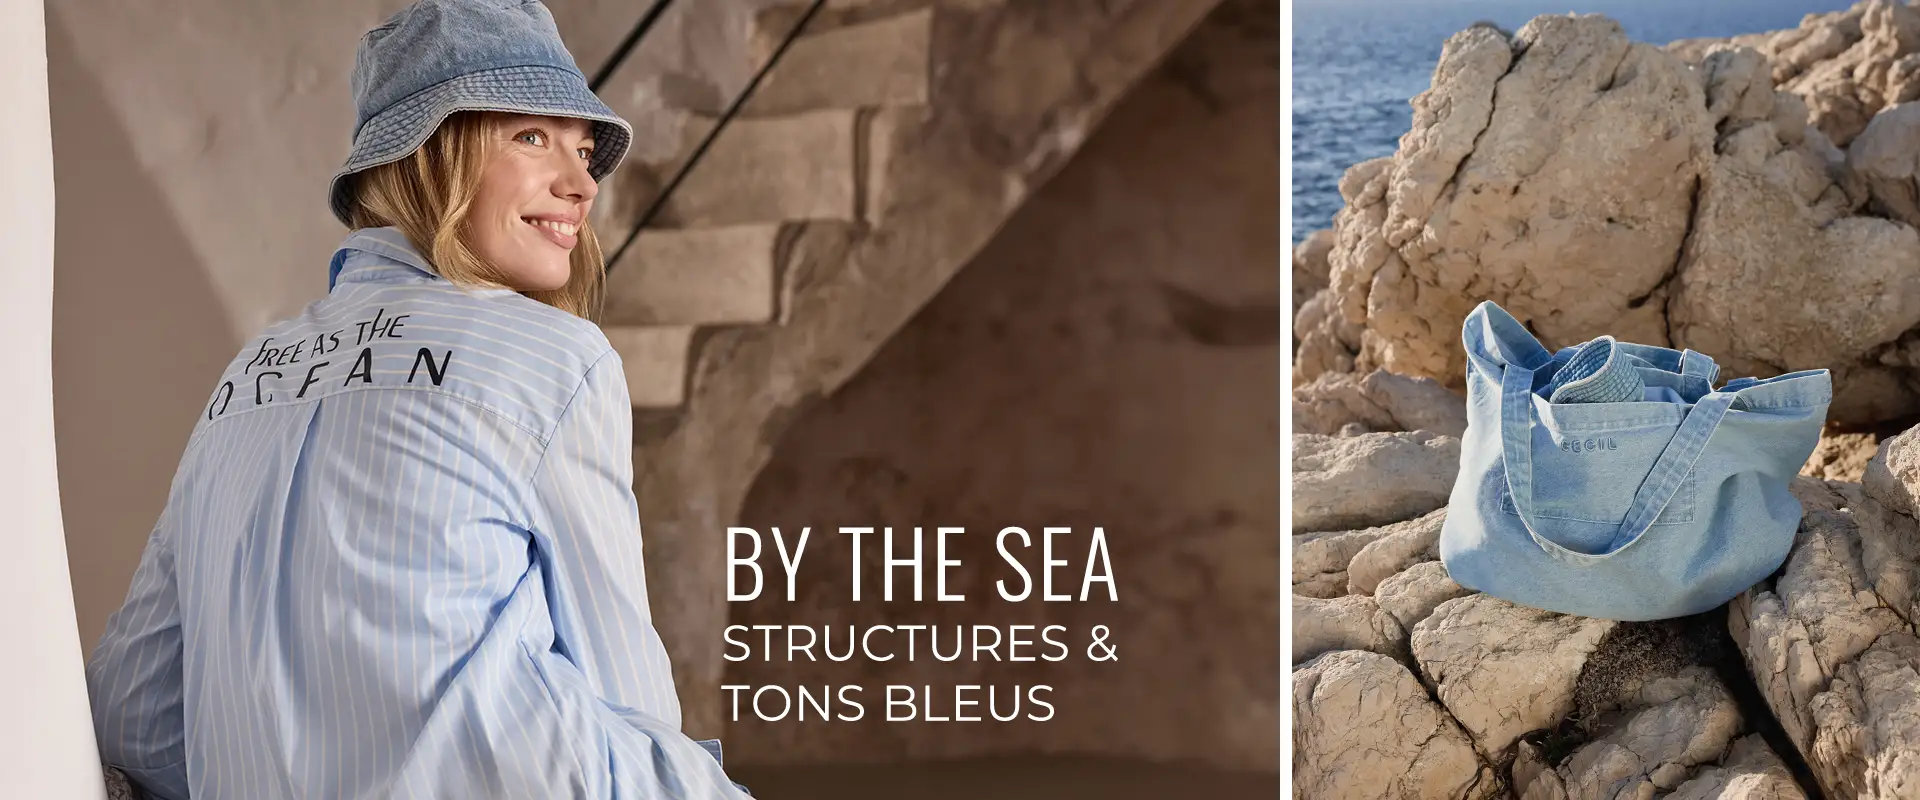 By the Sea Structures & tons bleus